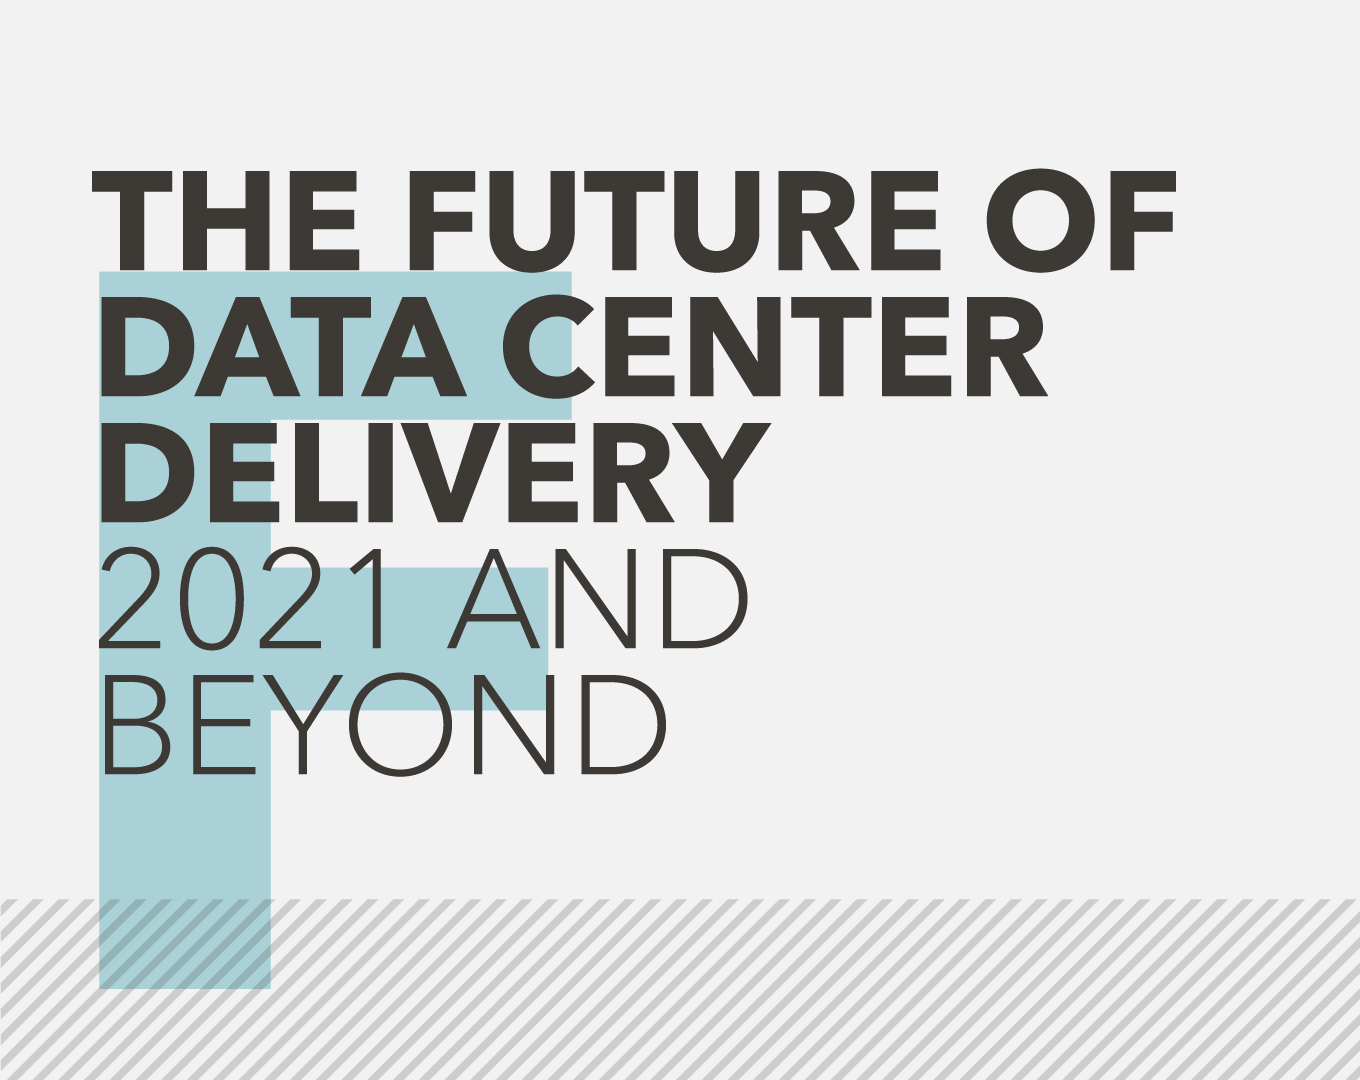 The future of data center delivery - 2021 and beyond